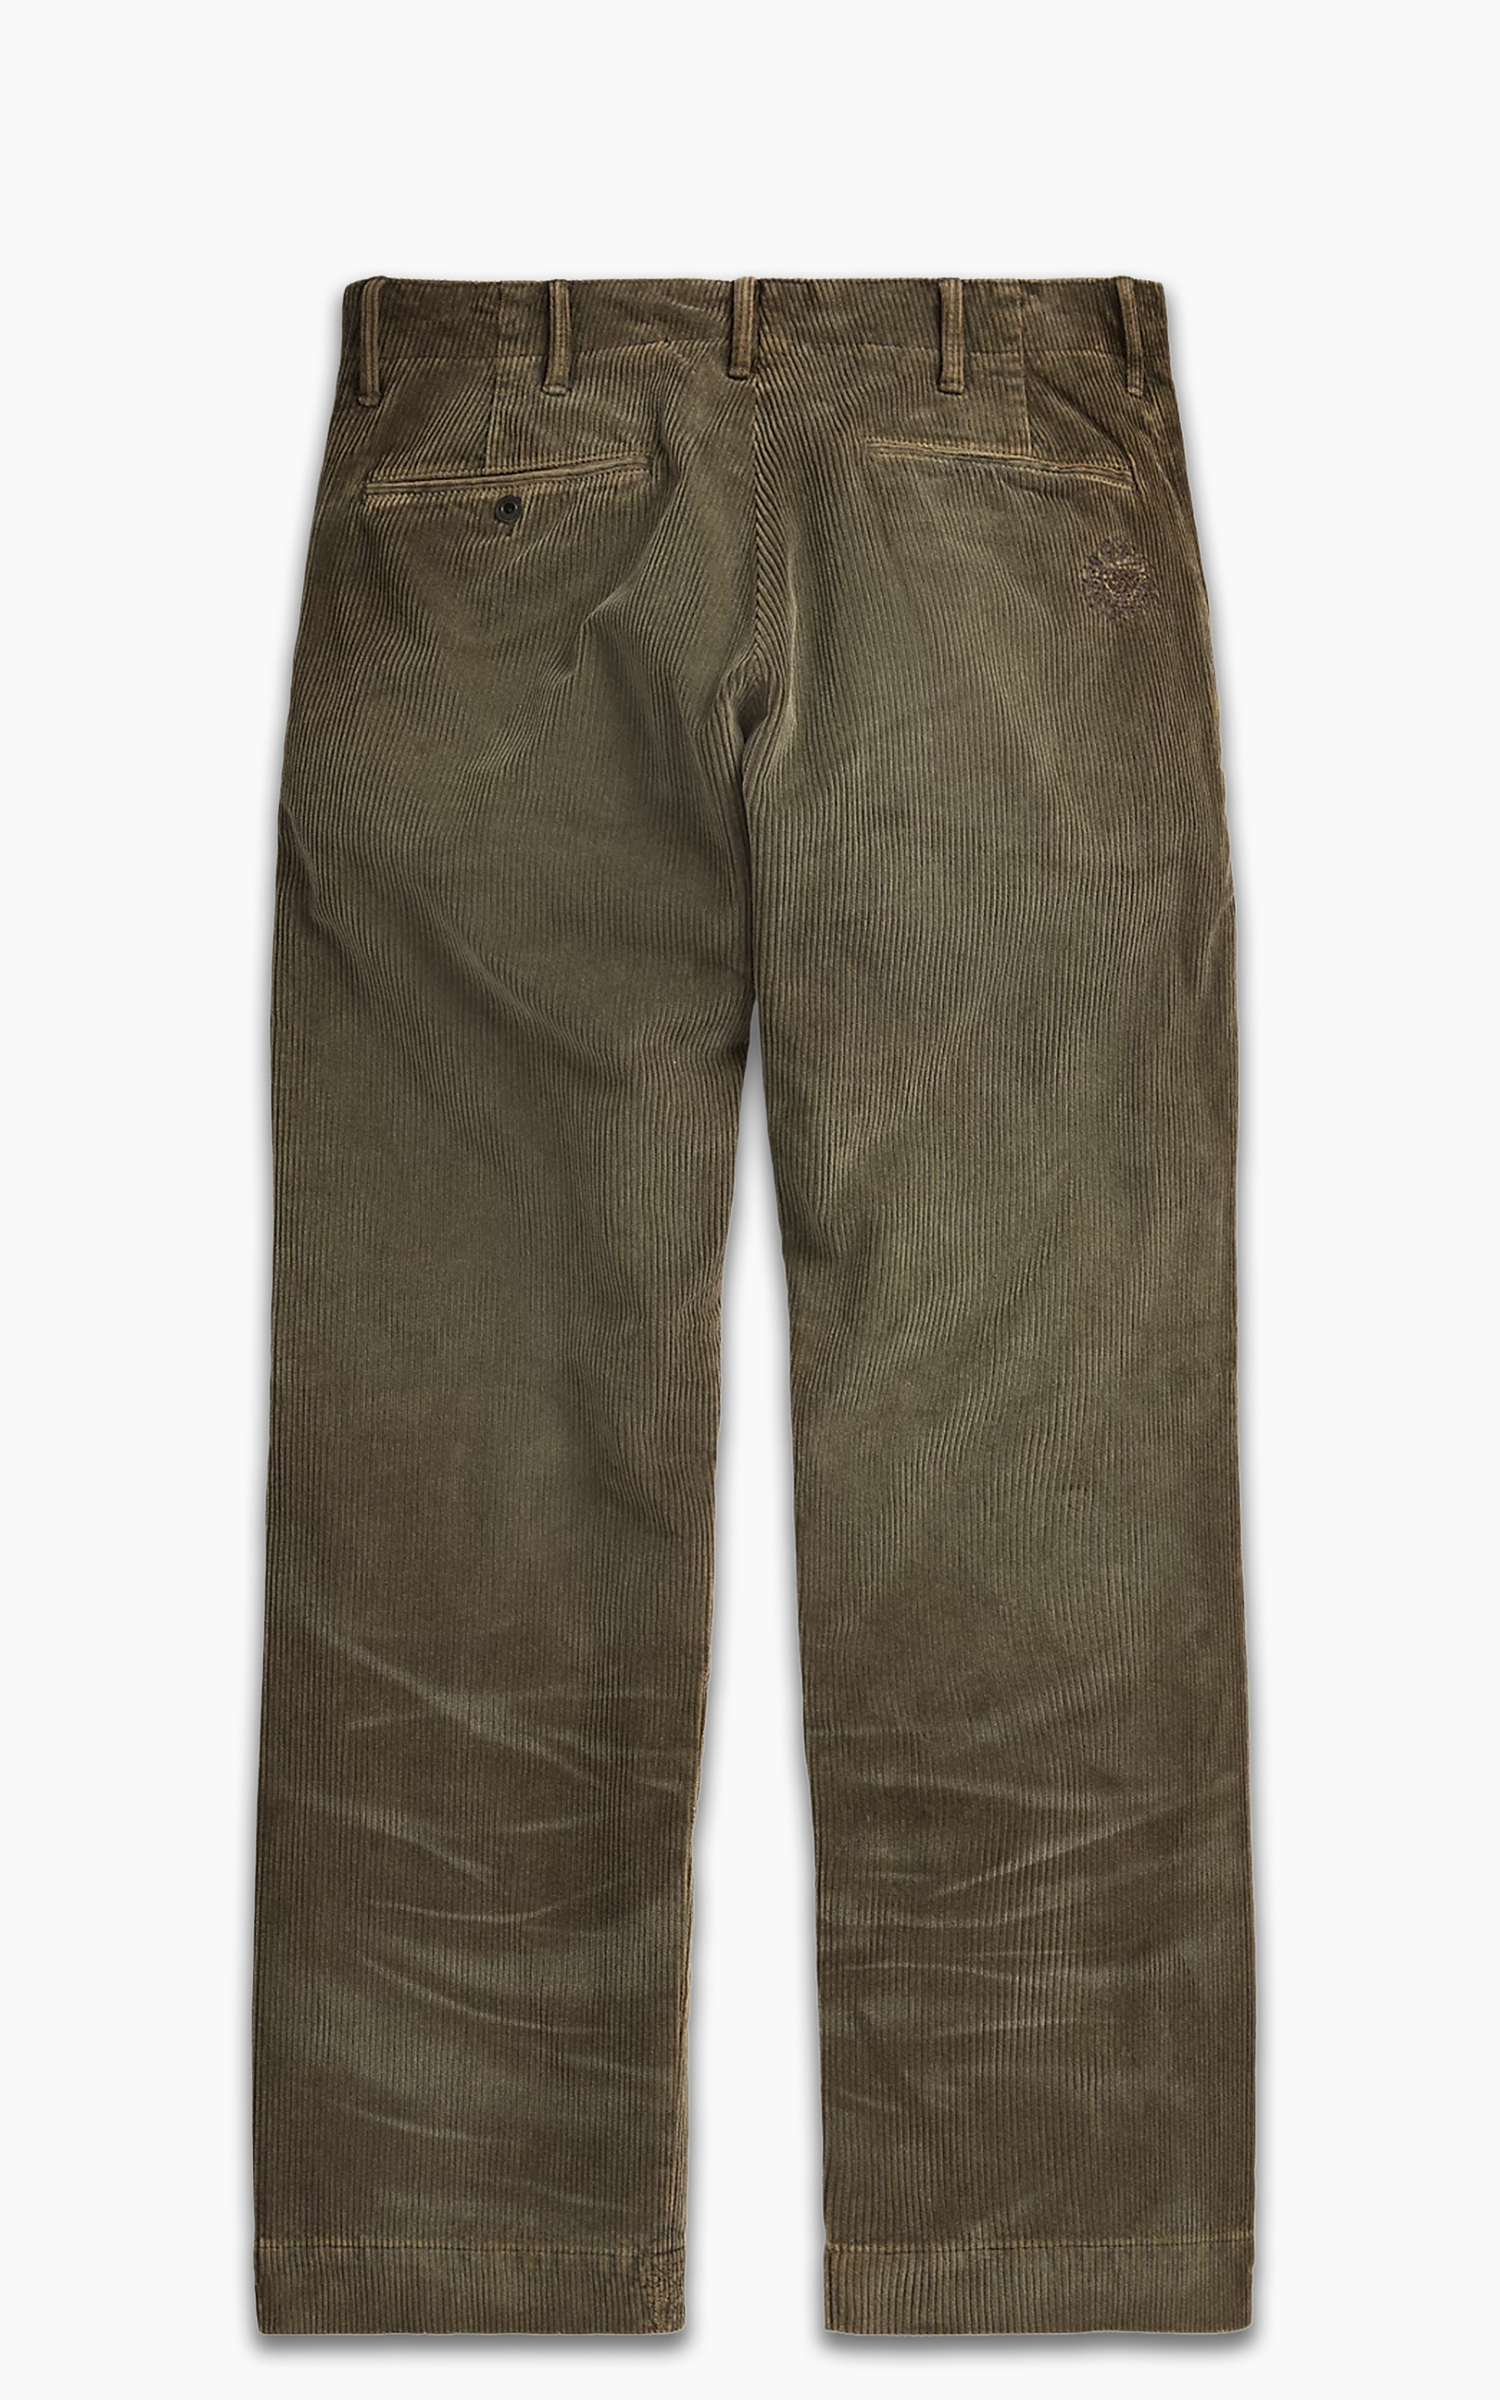 Distressed Corduroy Field Pant Loden Repaired